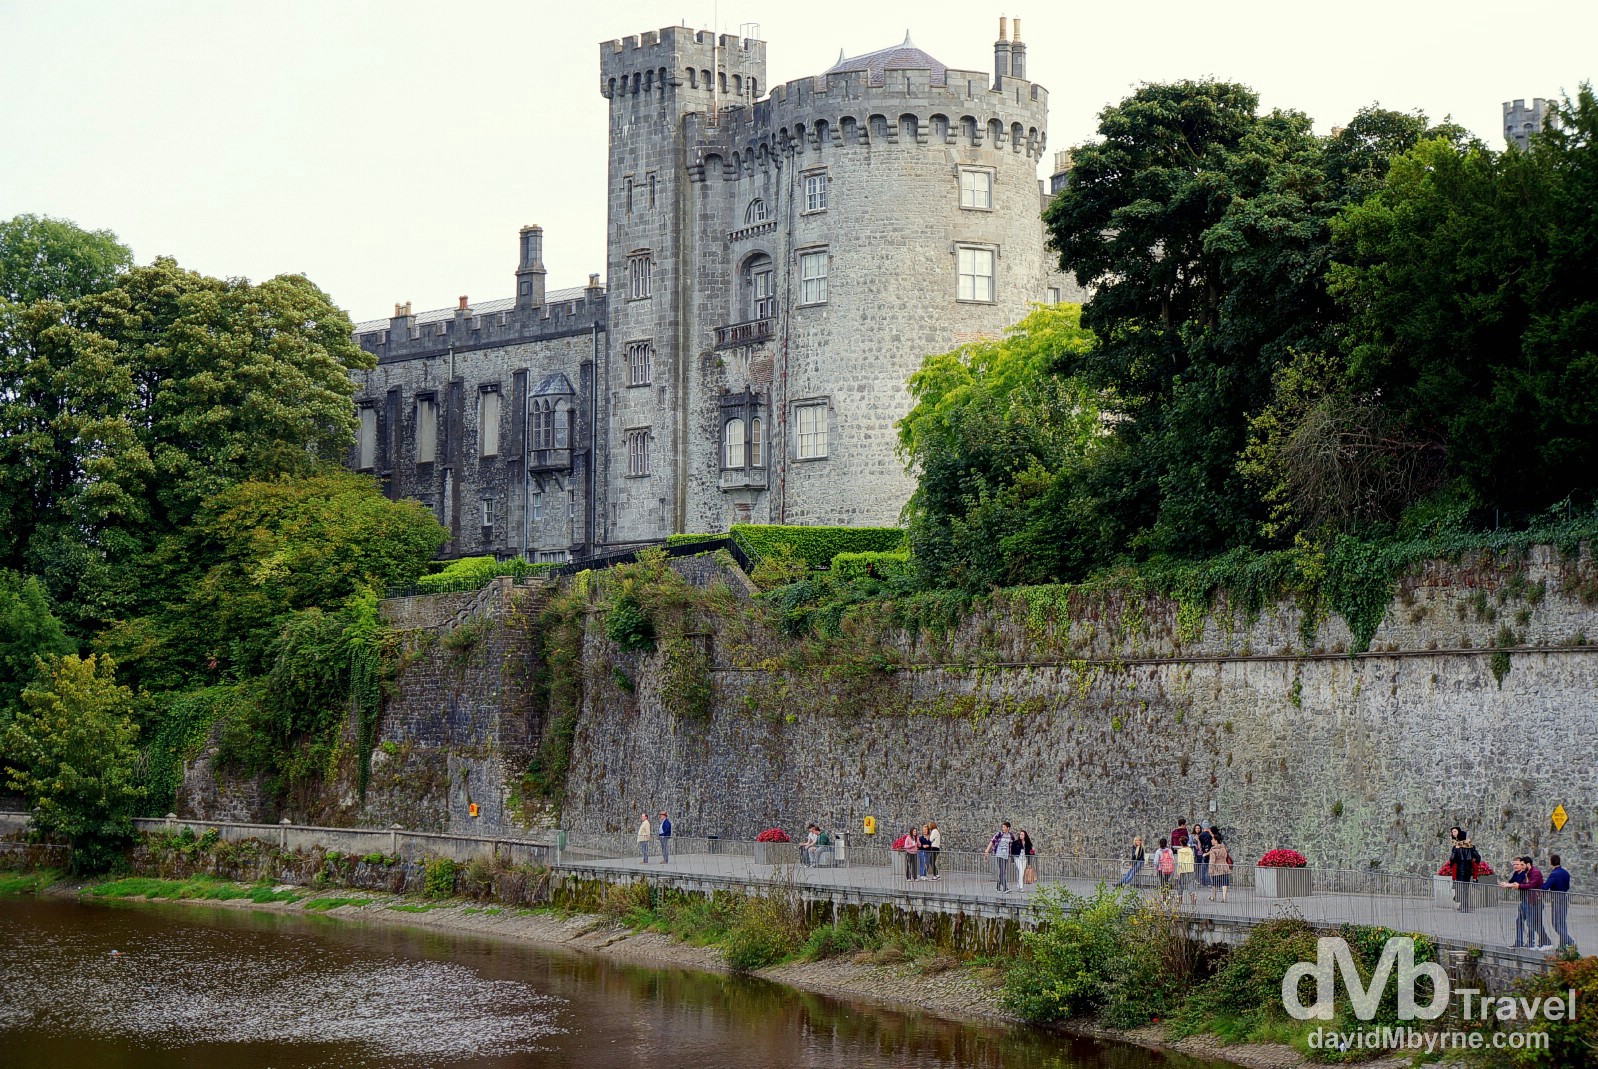 A portion of Kilkenny Castle as seen from a bridge over the River Nore in Kilkenny, Co. Kilkenny, Ireland. August 30, 2014.